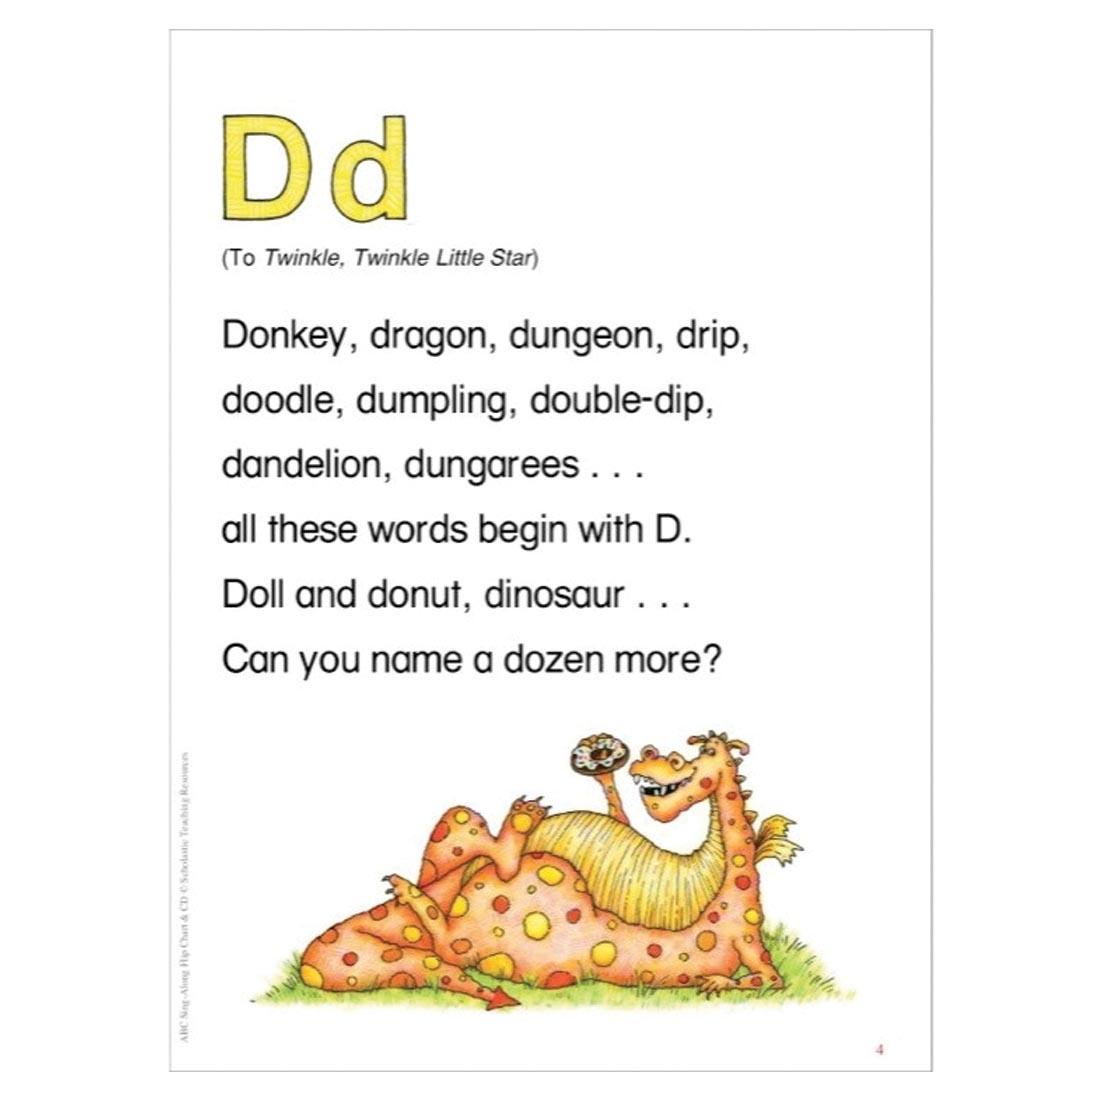 The page for D from the ABC Sing-Along Flip Chart